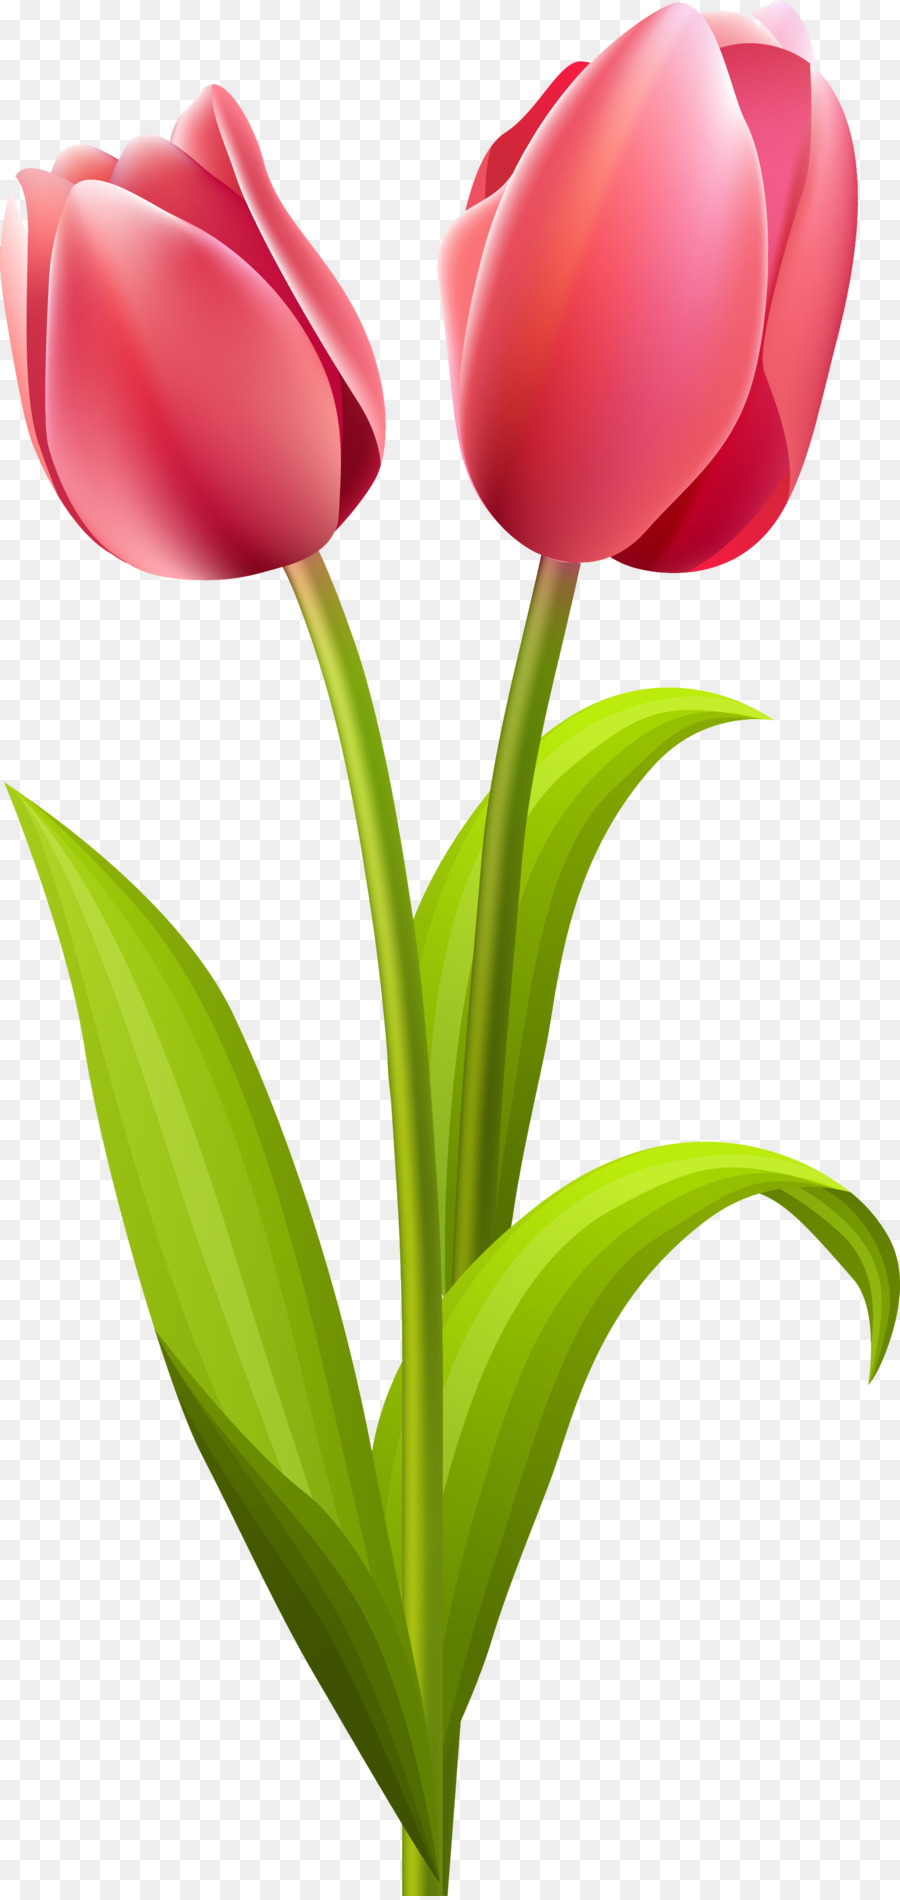 Lily Flower Cartoon png download